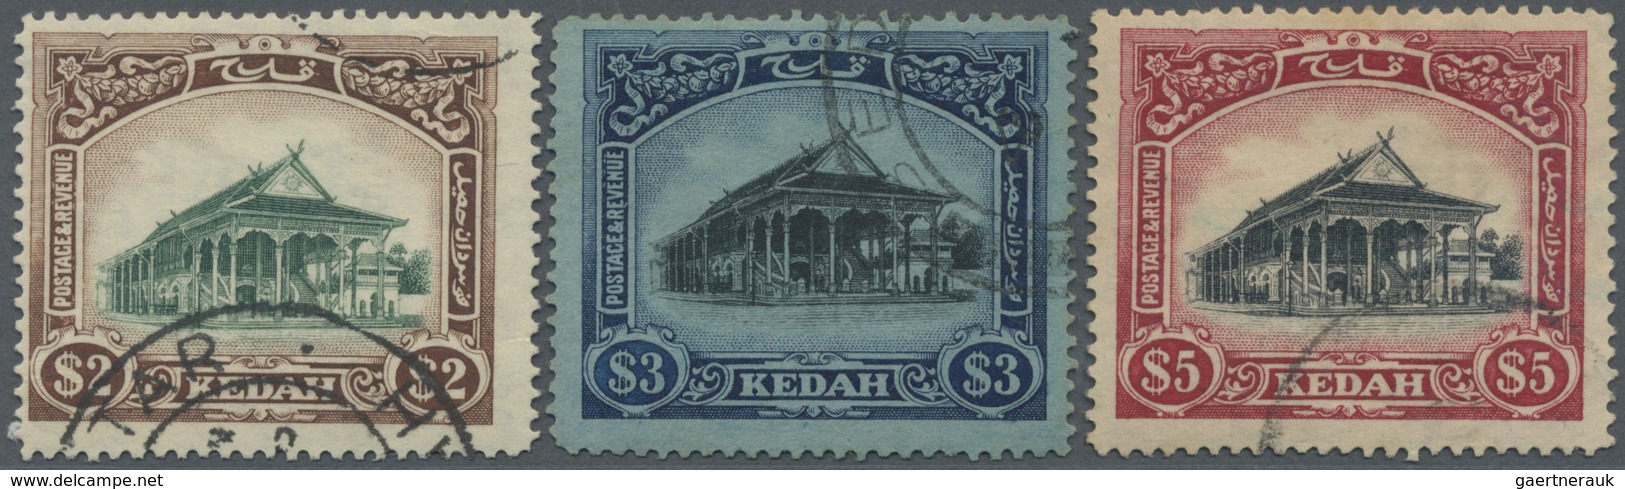 O Malaiische Staaten - Kedah: 1921, Definitives Issue (Sheaf Of Rice, Malay Ploughing And Council Cham - Kedah